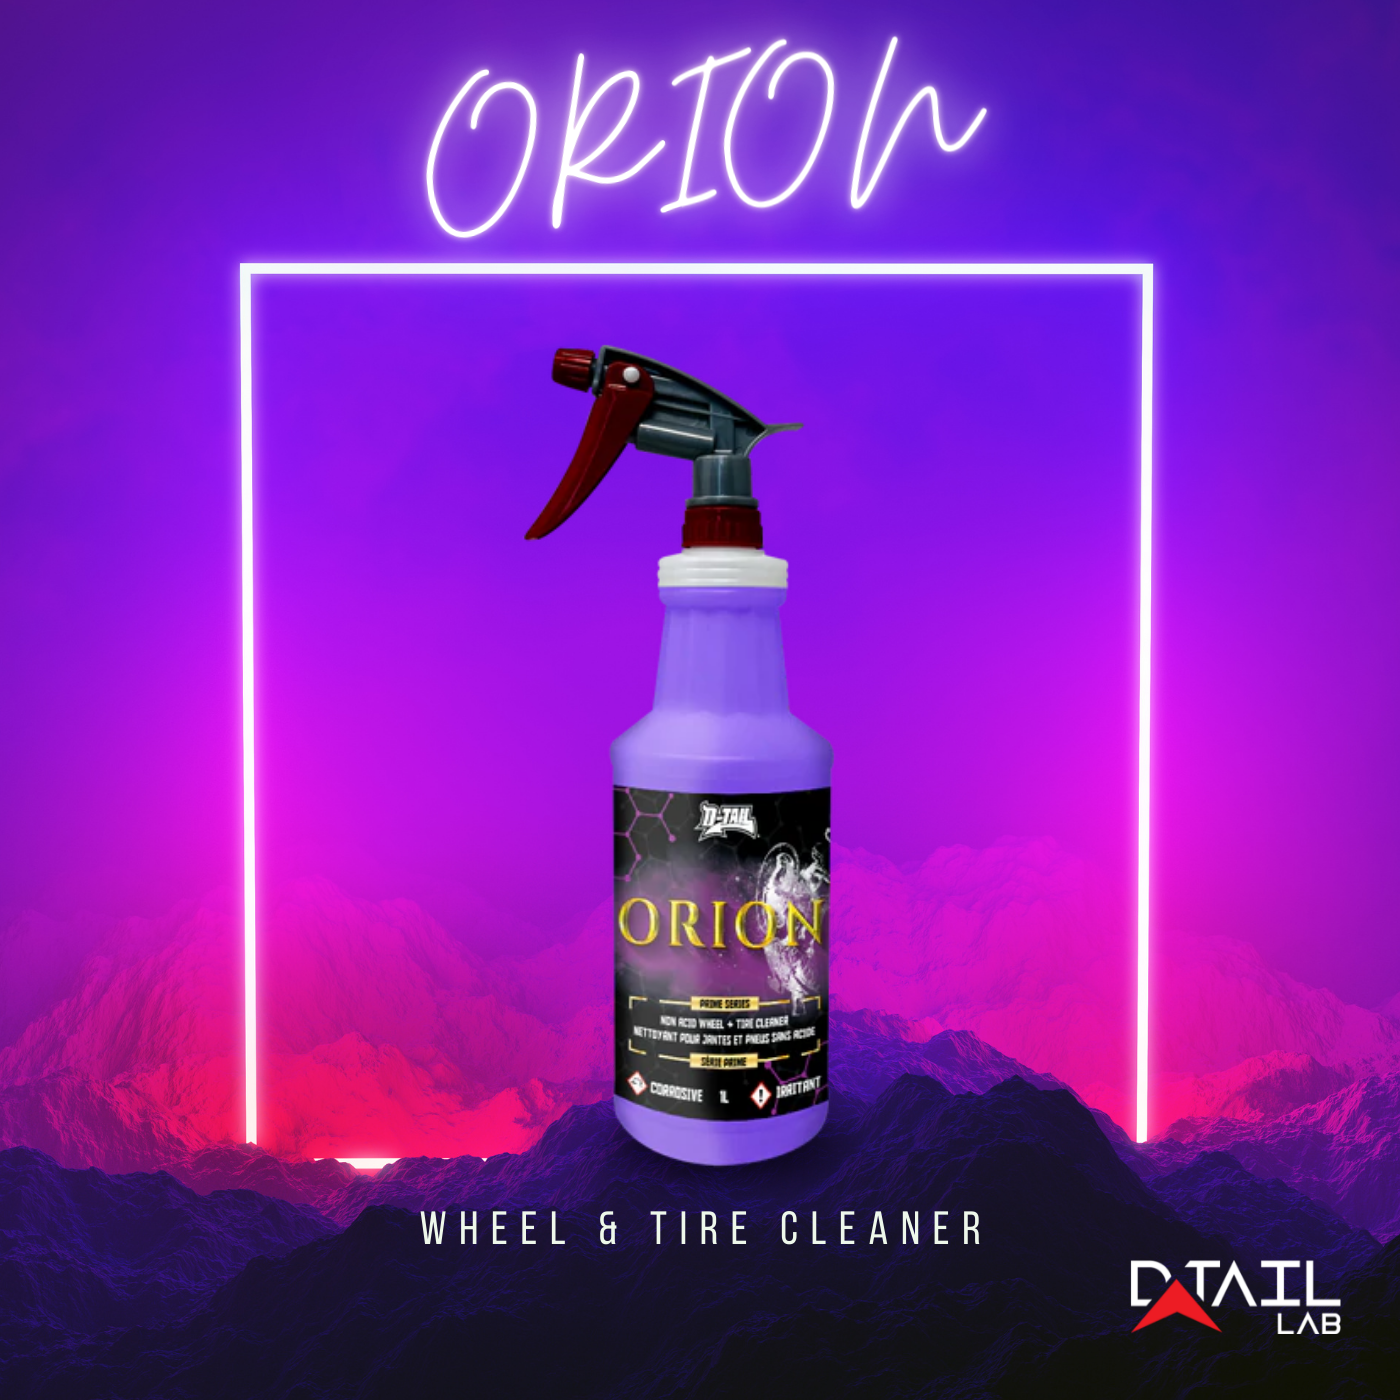 ORION Wheel & Tire Cleaner